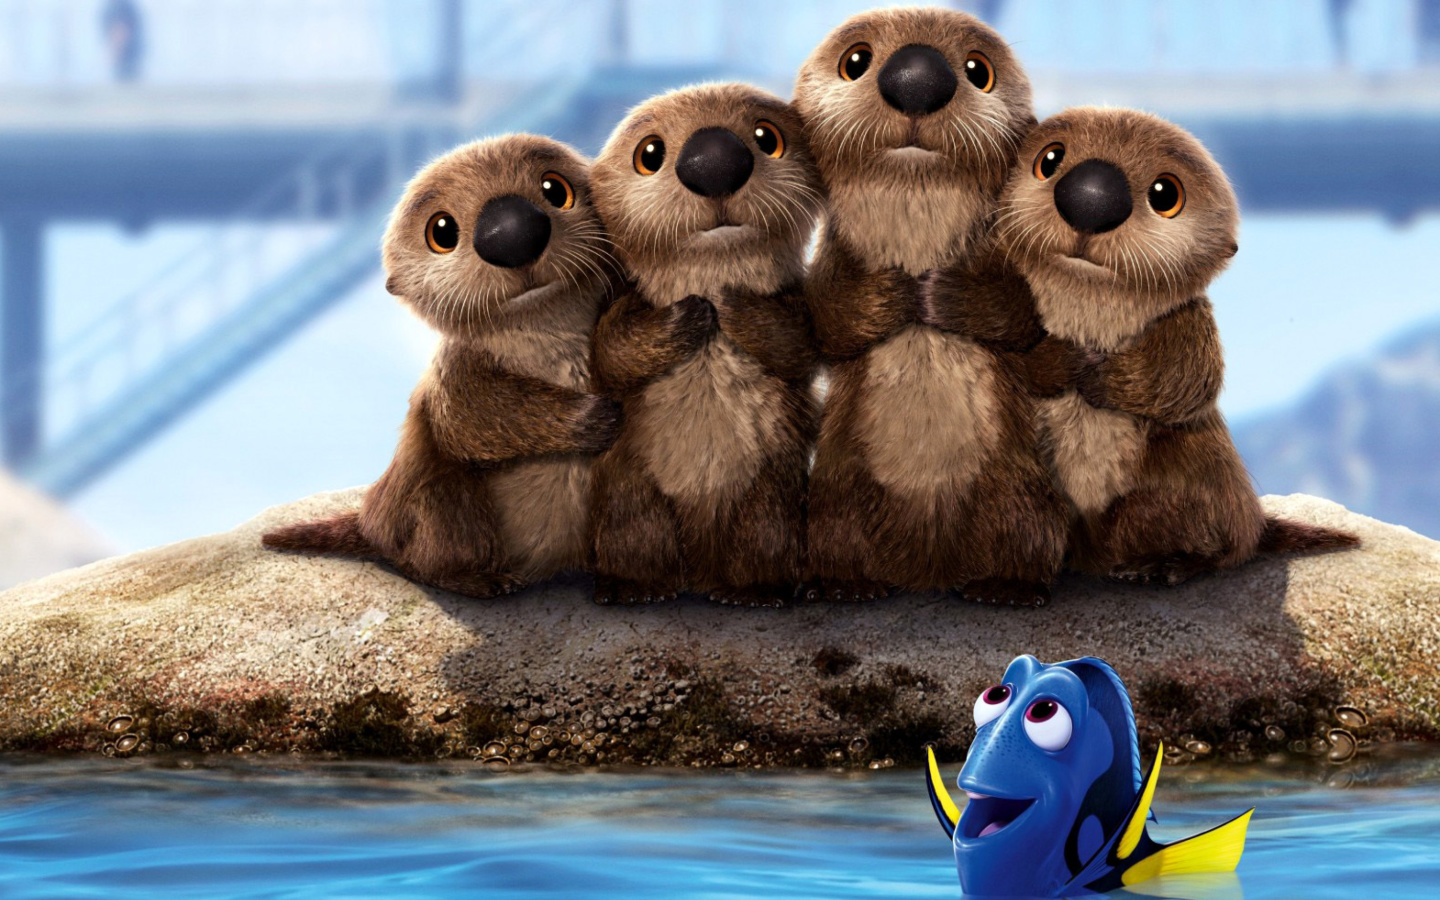 Finding Dory 3D Film with Beavers wallpaper 1440x900